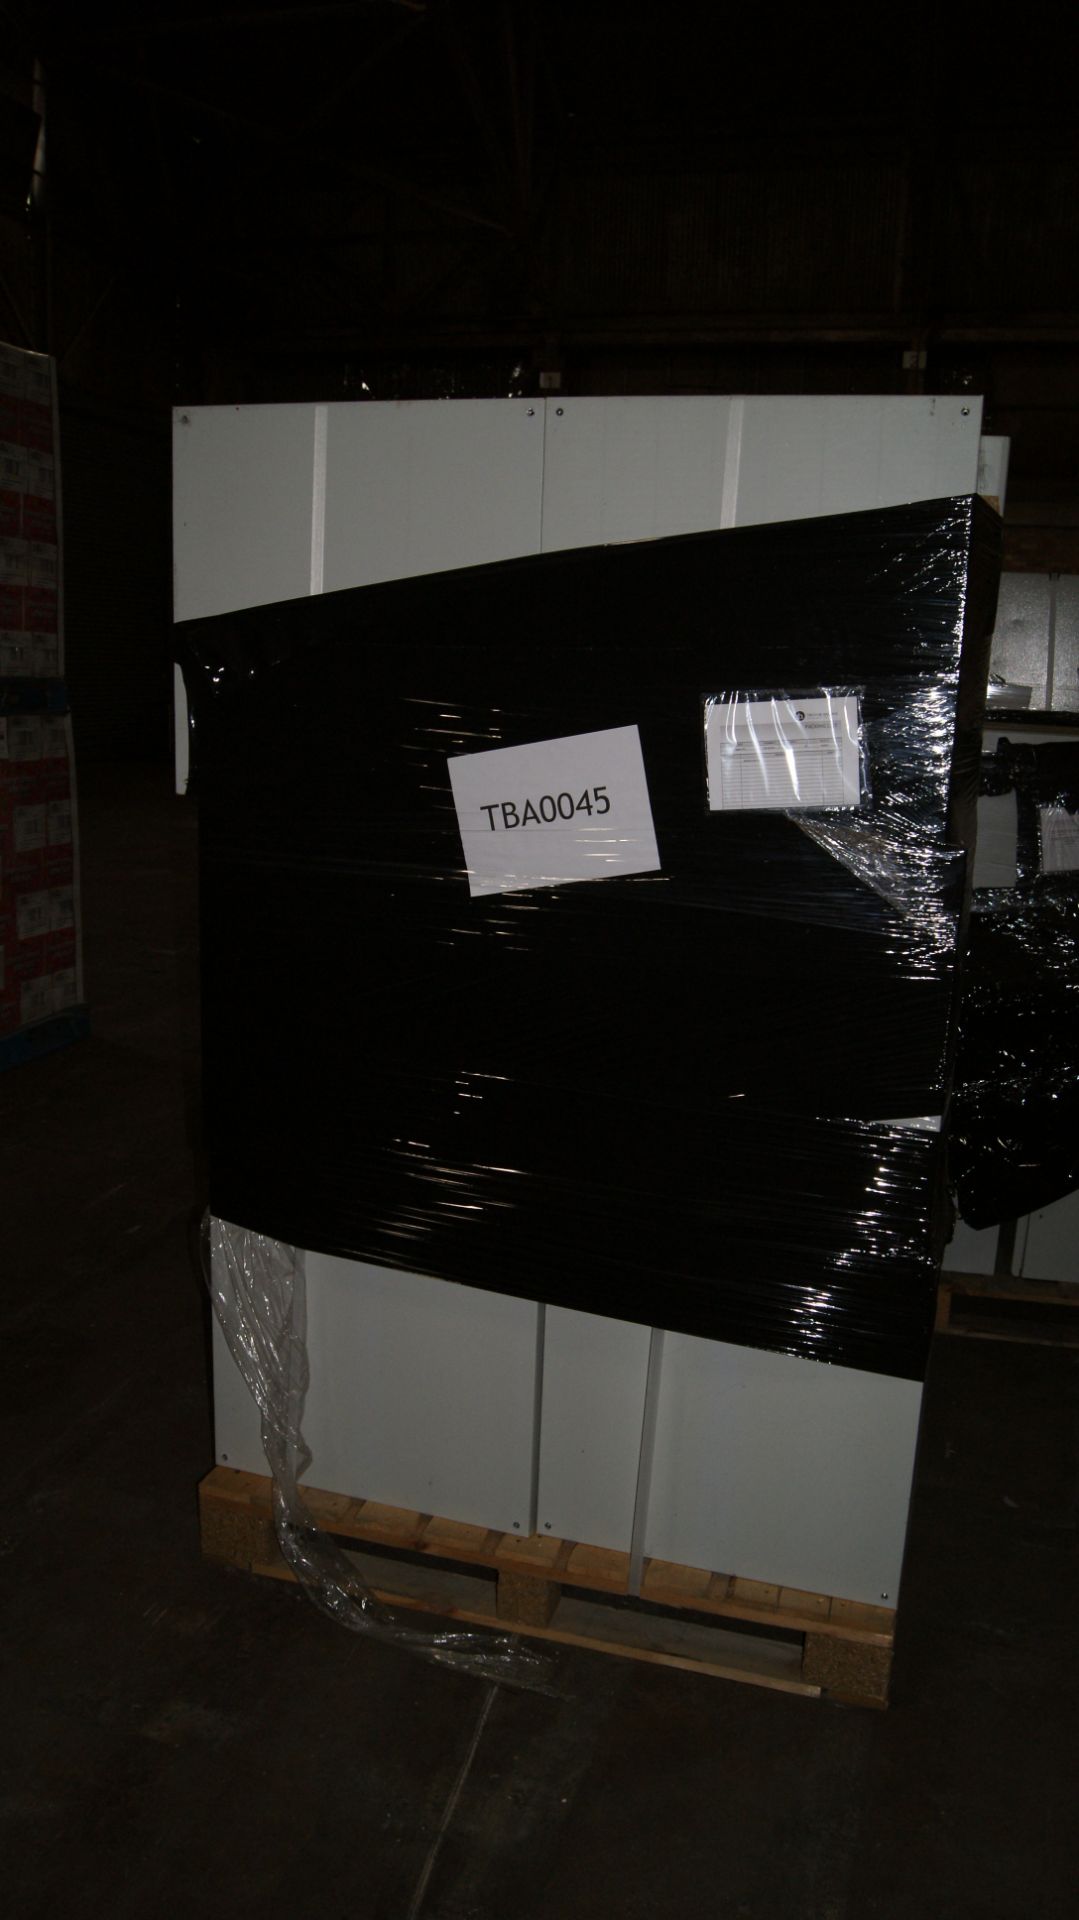 PALLET OF 18 EXTERNAL METAL ELECTRICAL ENCLOSURE - 600MM X 600MM X 300MM- CONTENTS MAY VARY